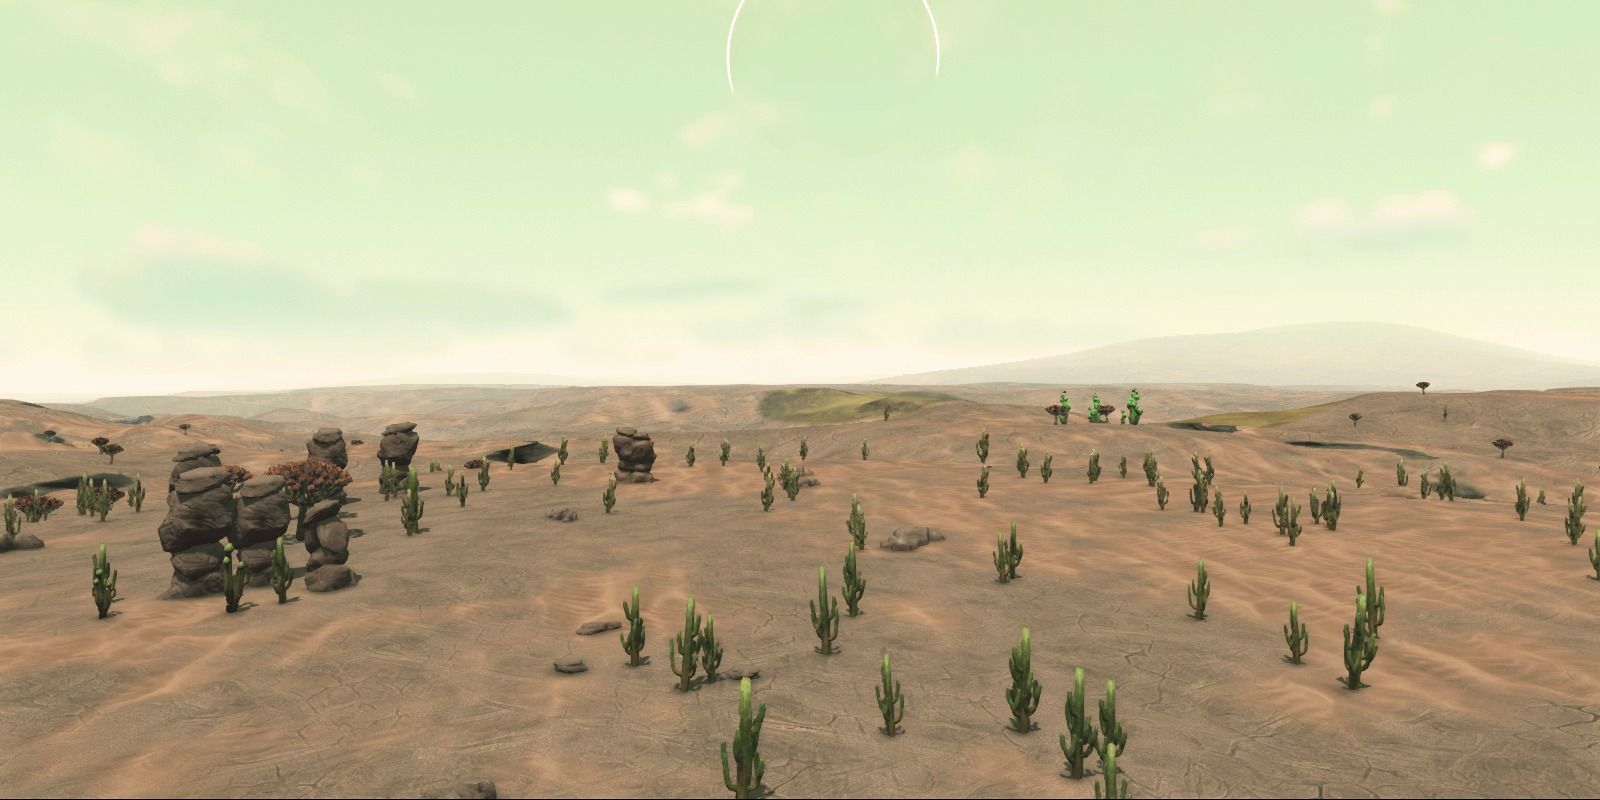 Barren landscape with nothing but sparse fauna and flora